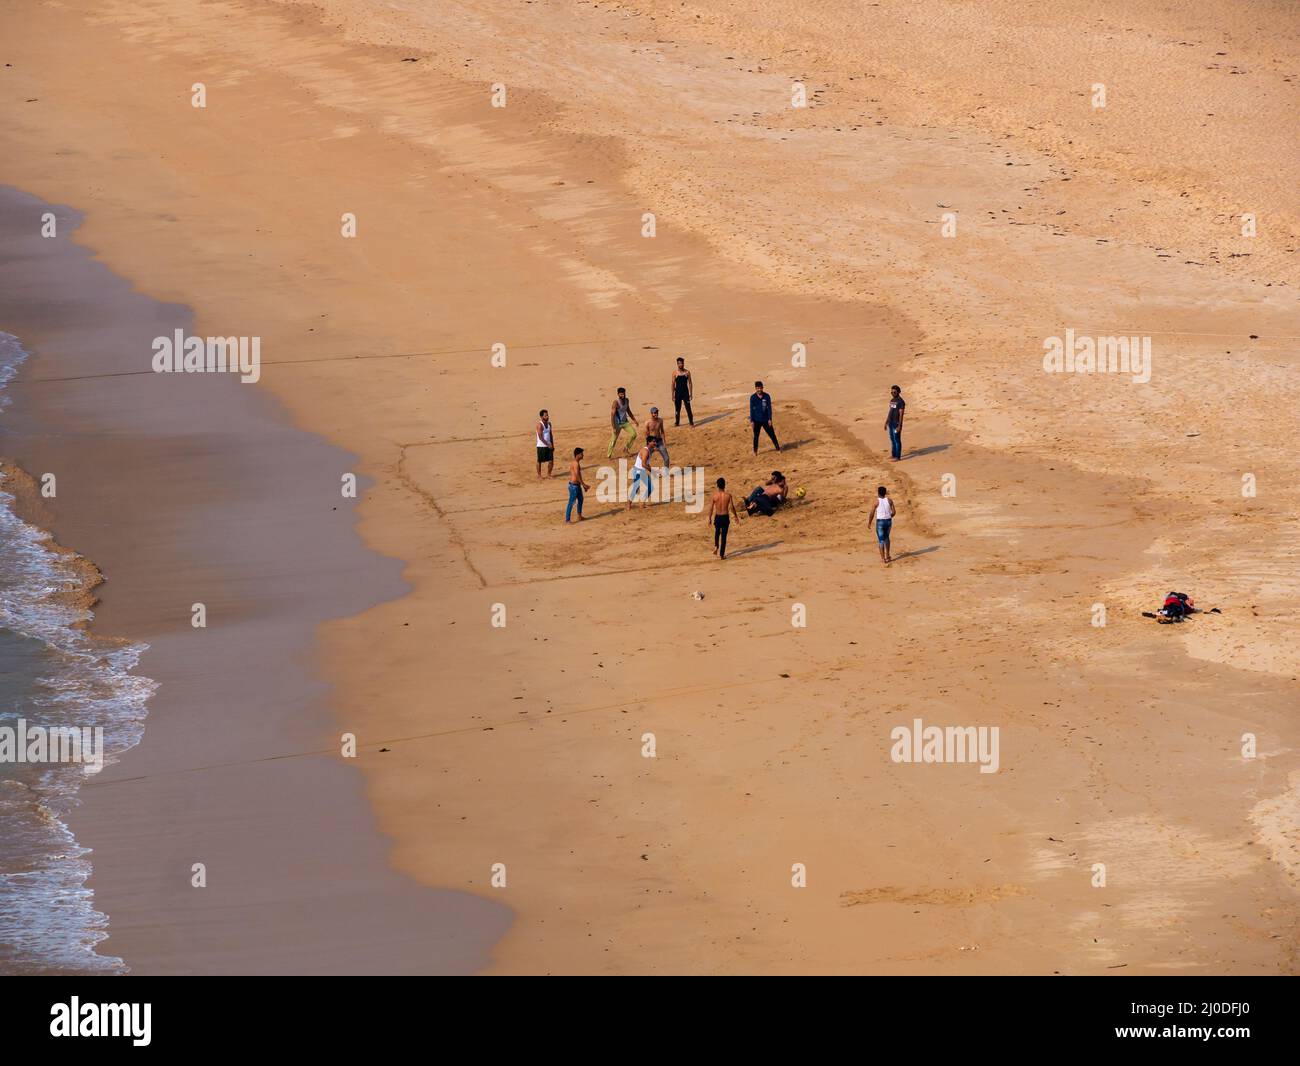 Sindhudurg, India - December  21, 2021 : Unidentified indian guys playing beach volleyball at neat and clean Devgadh beach. Stock Photo